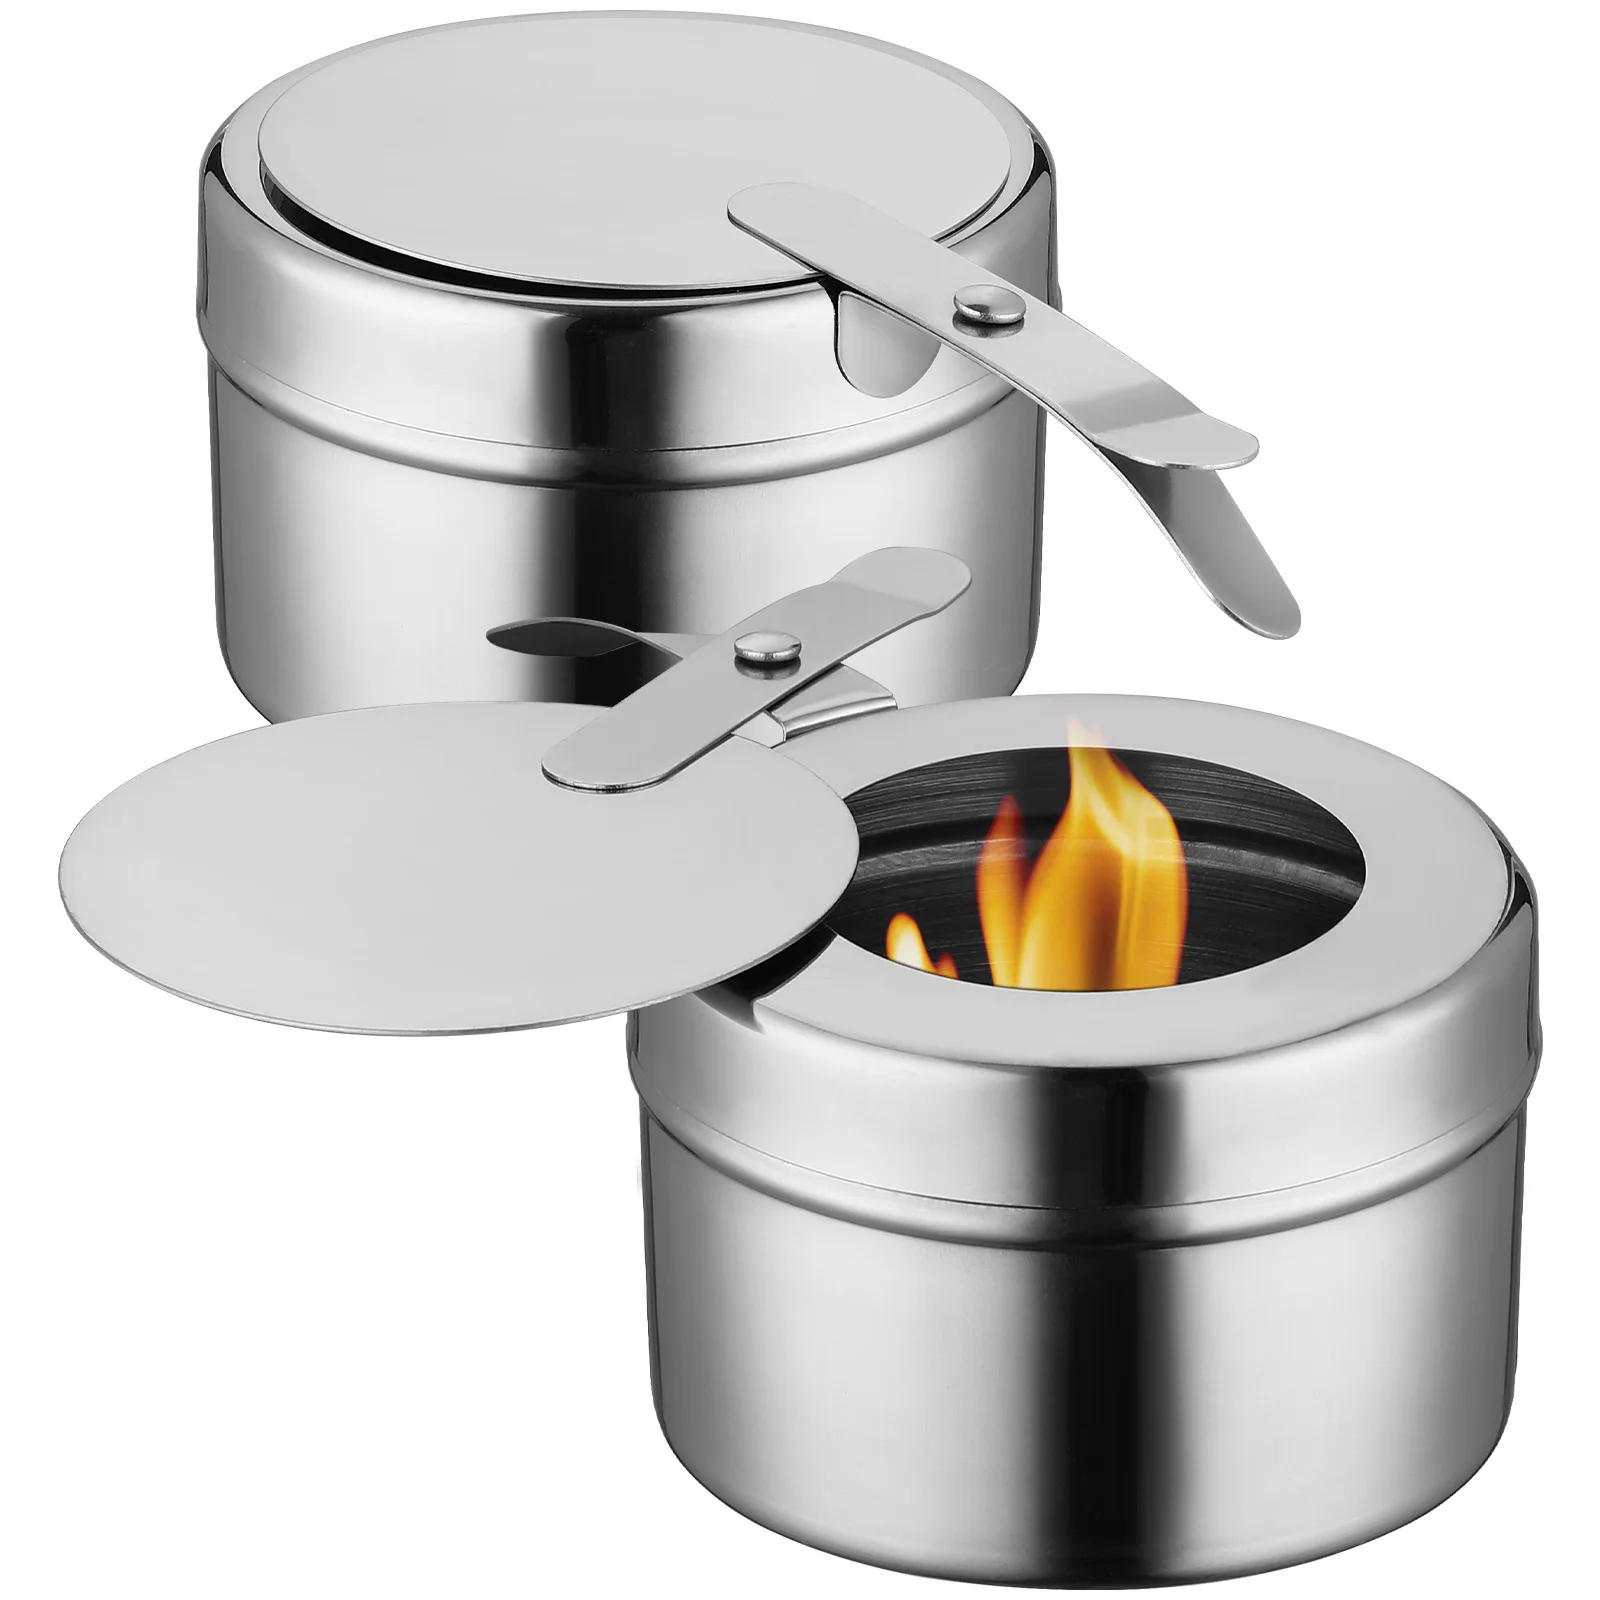 

2pcs/4pcs Stainless Steel Chafer Wick Fuel Cans With Covers With Cover Chafer Canned Heat Buffet Warmers Fuel Cans For Buffets